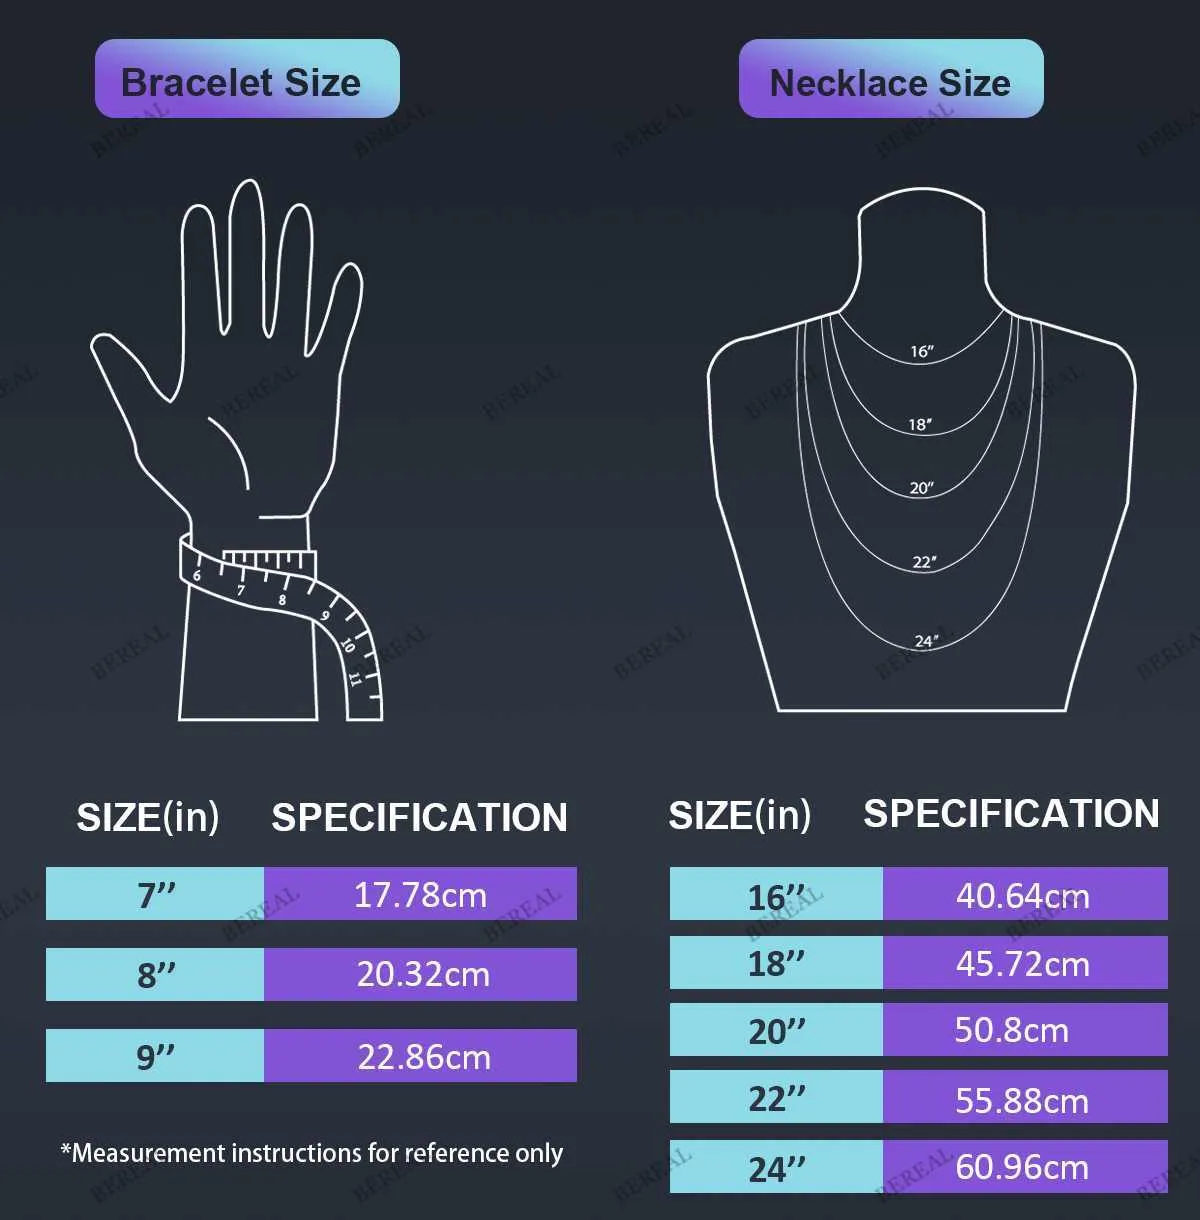 Jewelry Size Guide – How to Select the Right Size Pendant